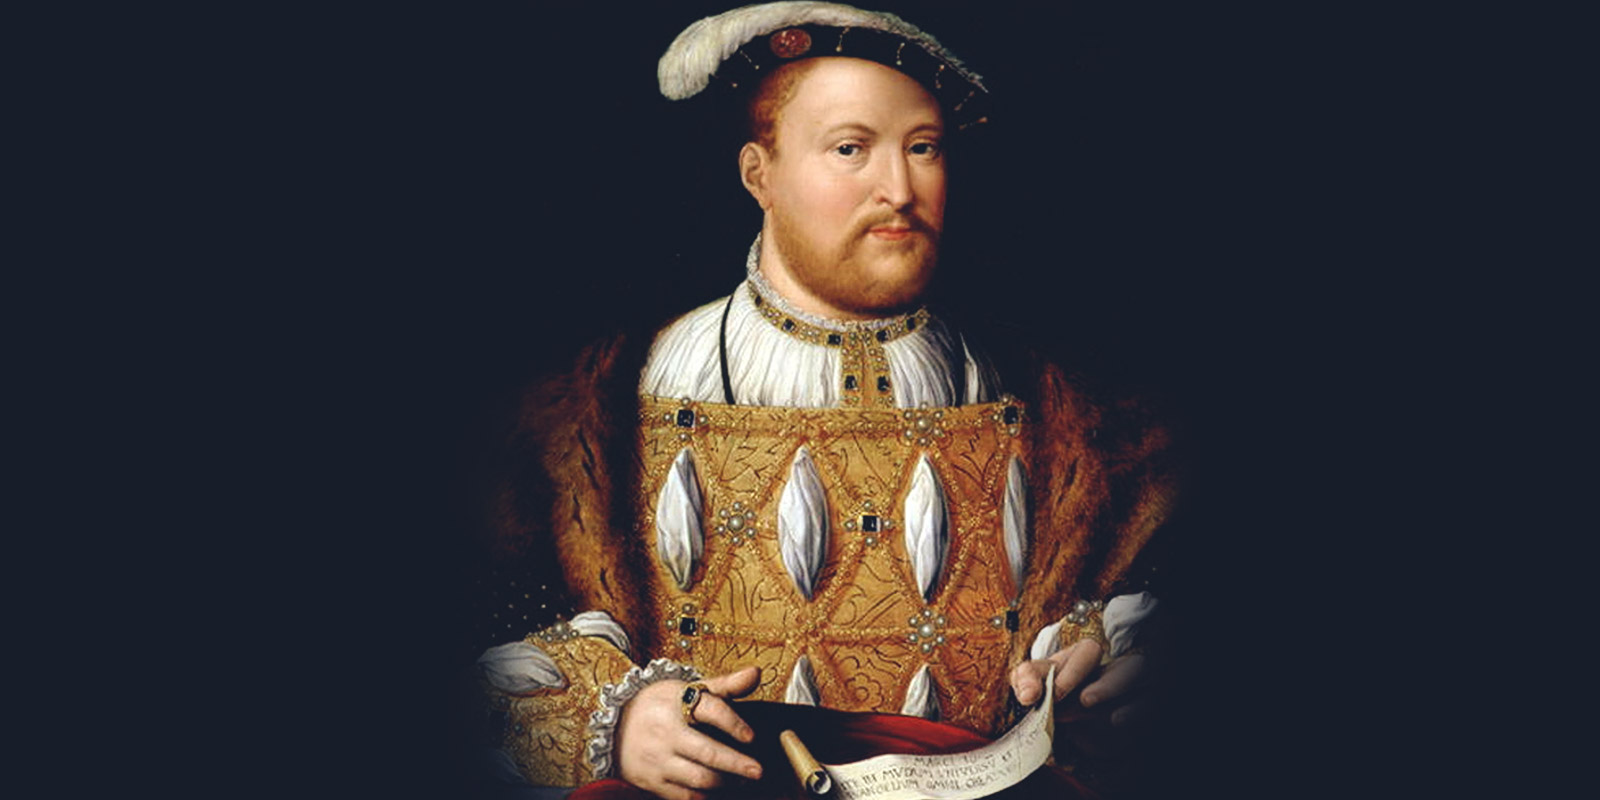 15 Fun Facts About Henry VIII